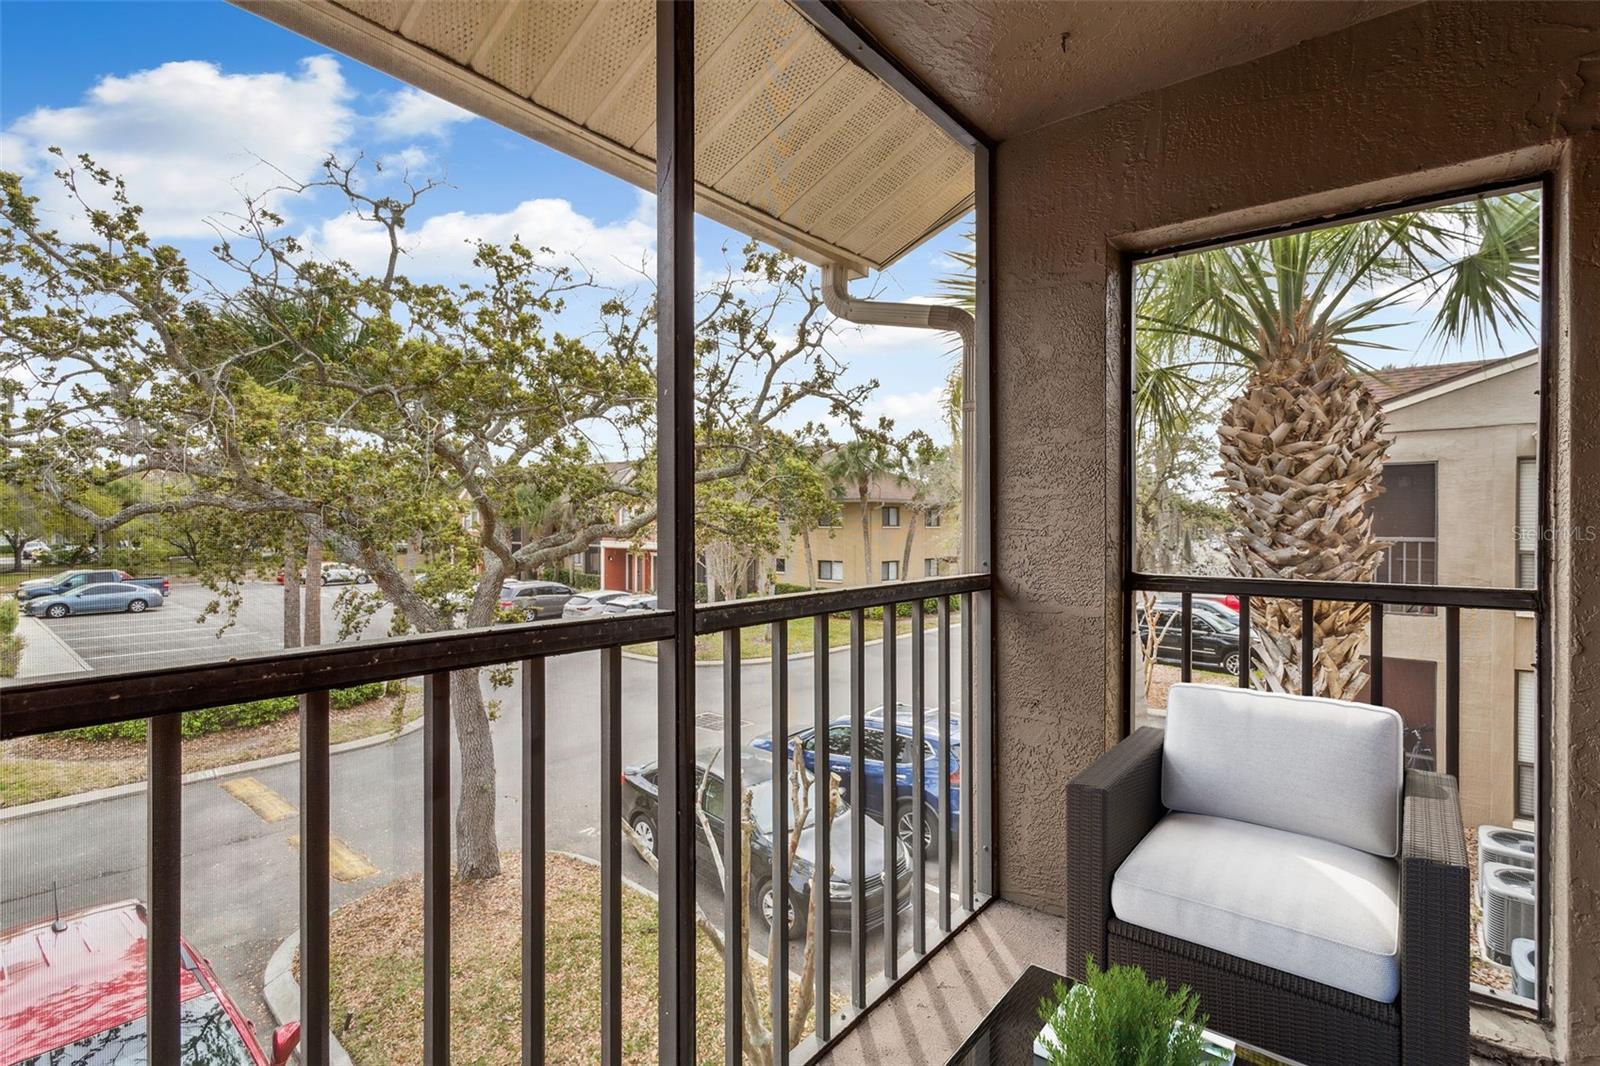 The screened in balcony has space for outdoor furniture to sit and enjoy your morning or evening beverage, read a book, enjoy fresh air while visiting. Leave the sliding doors open for air or close when the A/C is on but still have light flowing through.